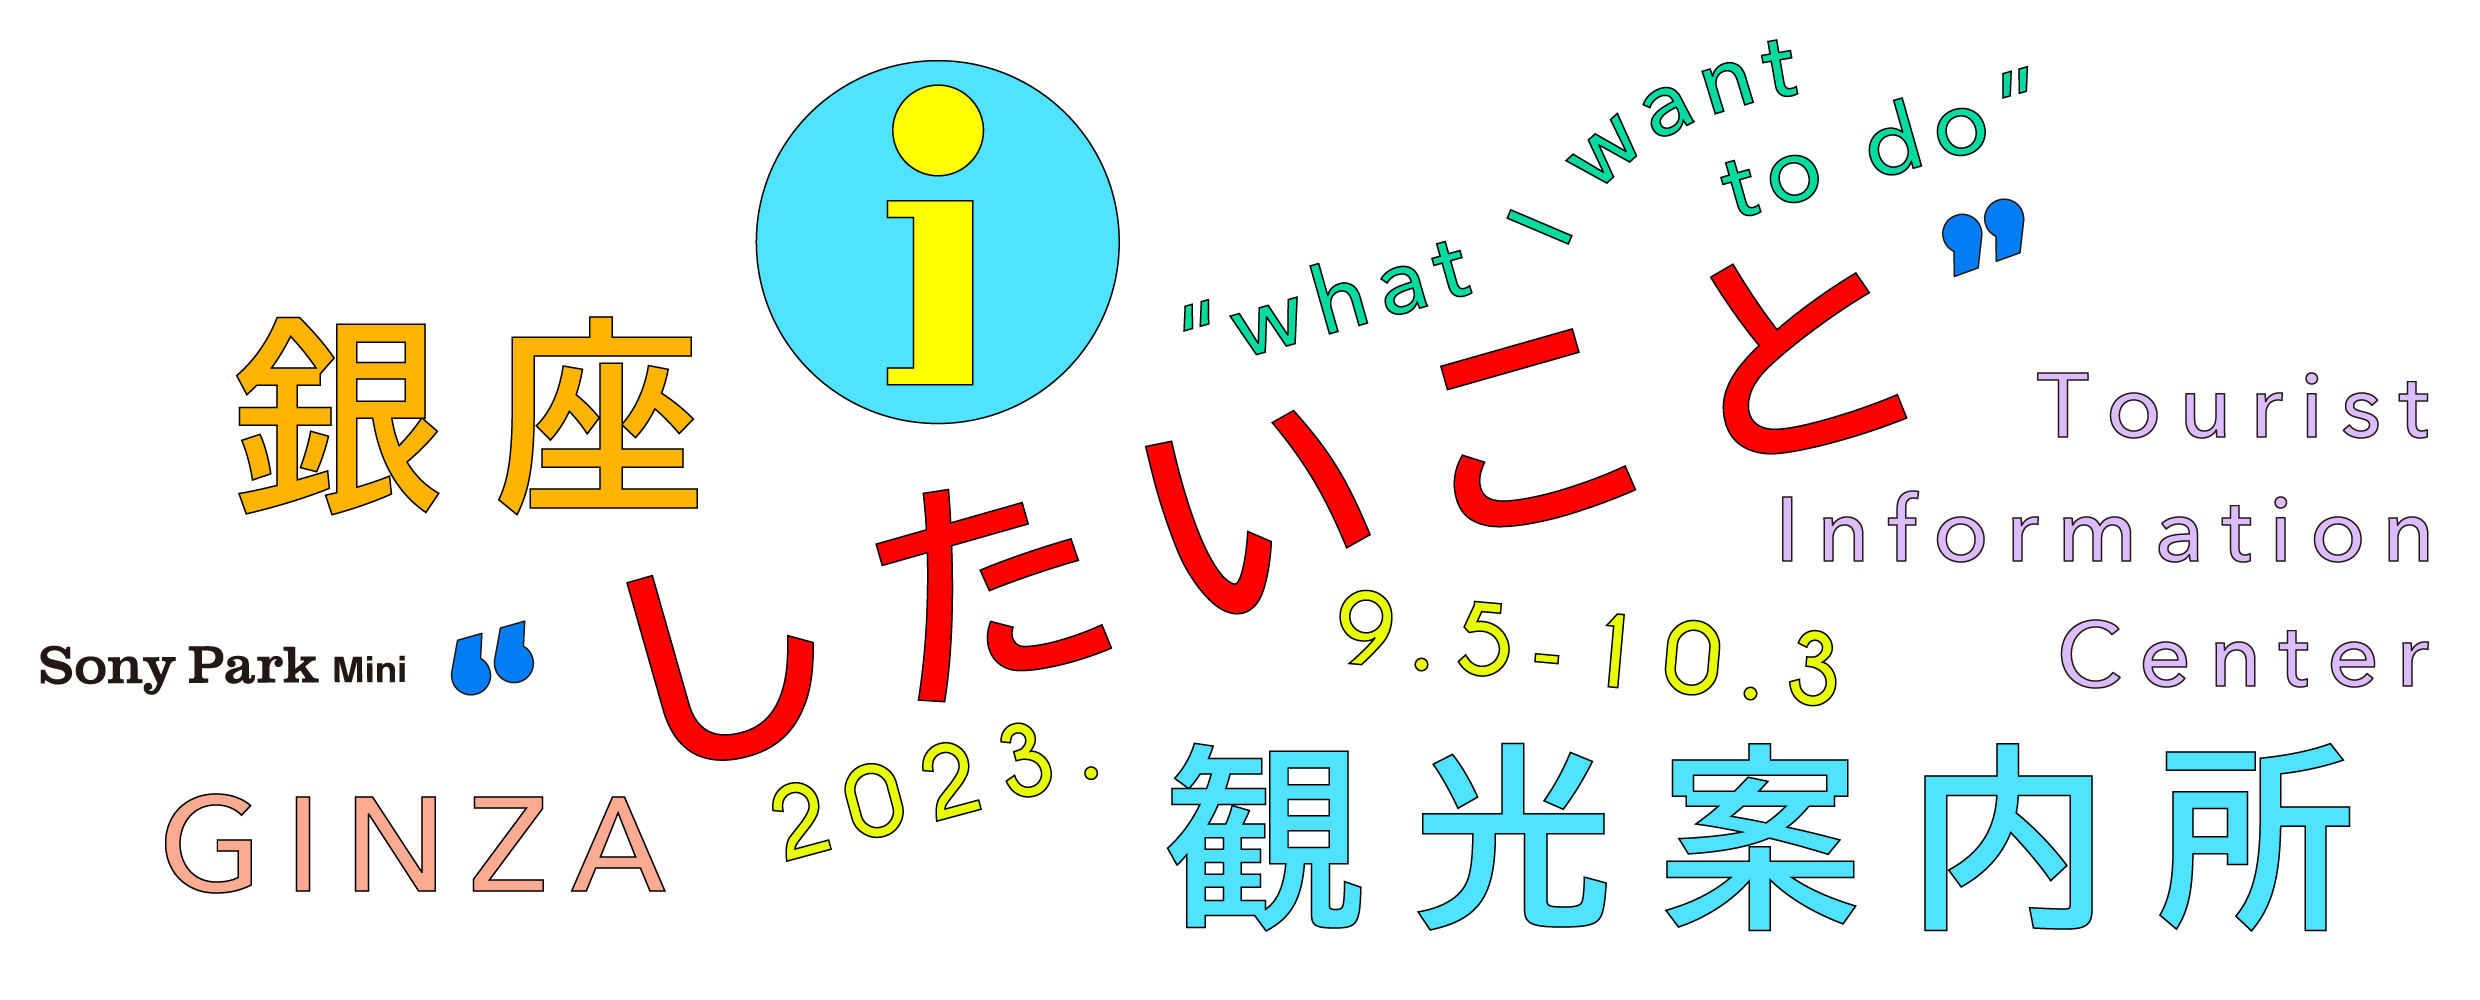 Ginza "What I want to do" Tourist Information List